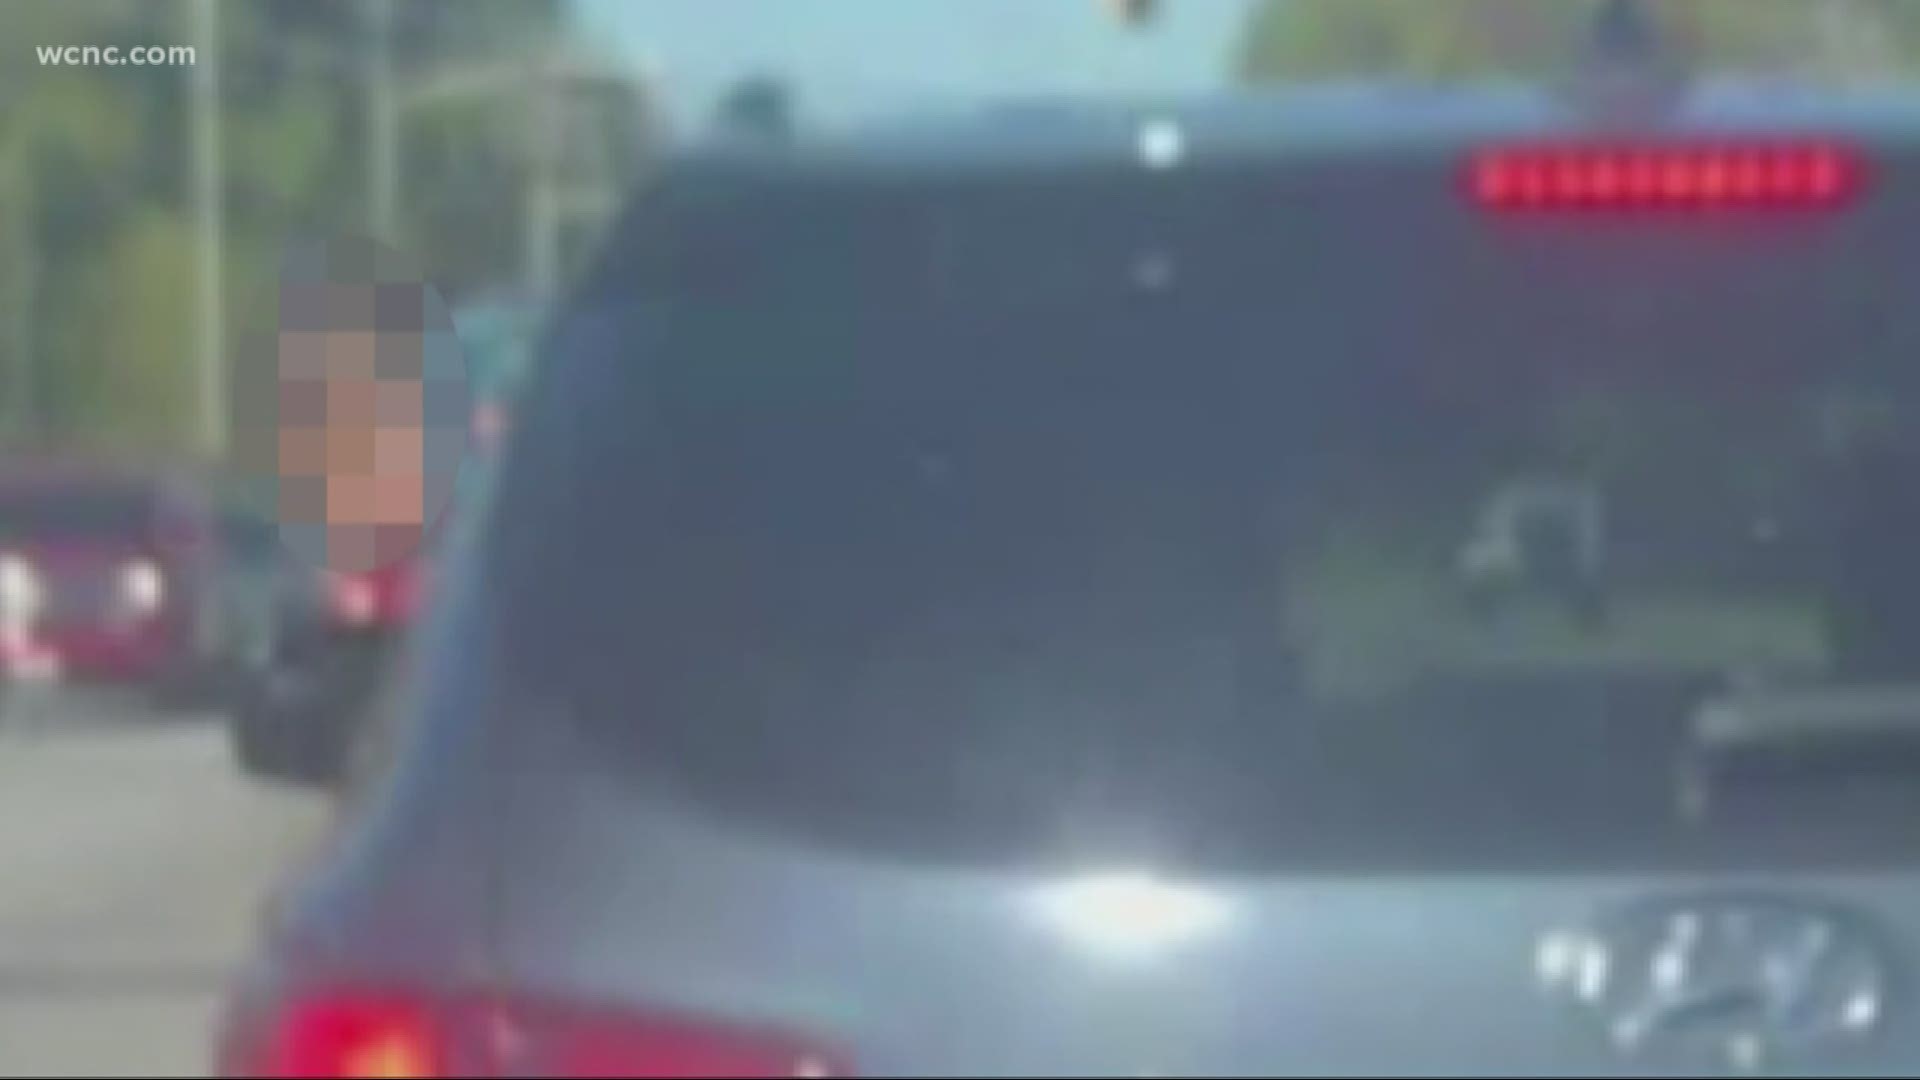 The woman who took the video said the girl wasn't only hanging out of the window but was also walking around the back seat as the car was moving.